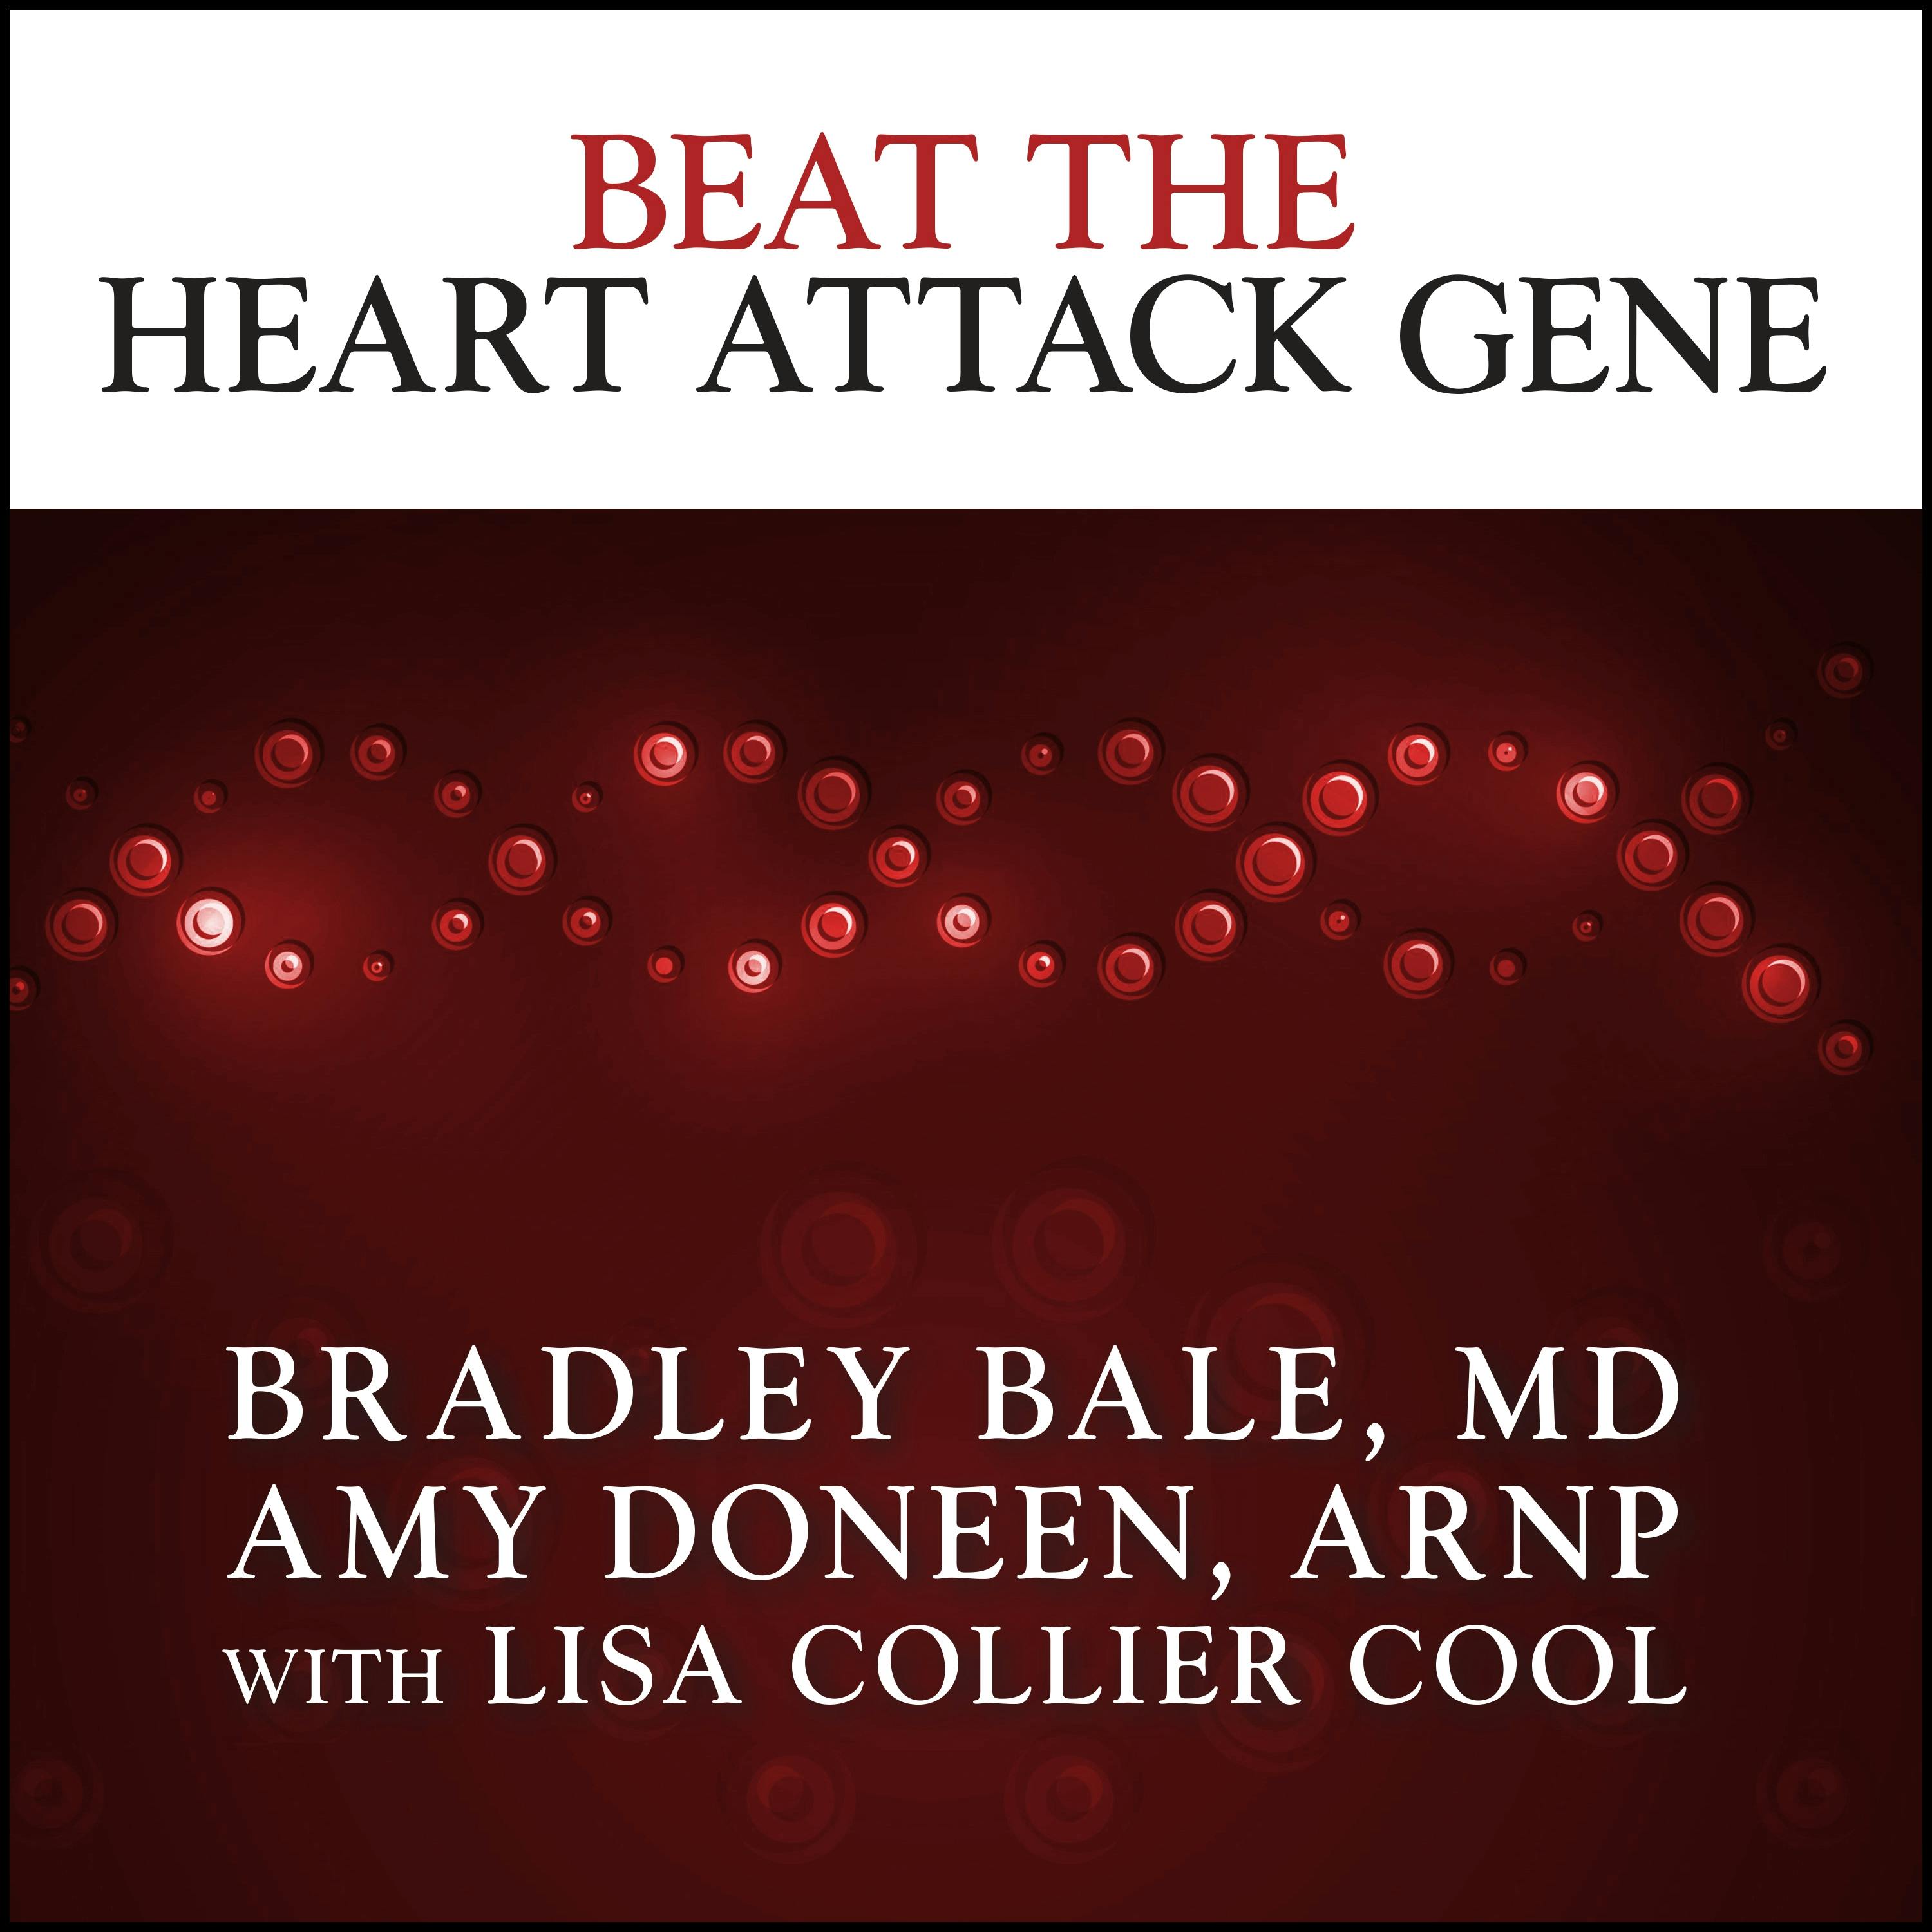 Beat the Heart Attack Gene: The Revolutionary Plan to Prevent Heart Disease, Stroke, and Diabetes - Bradley Bale, M.D., Amy Doneen, ARNP, Lisa Collier Cool